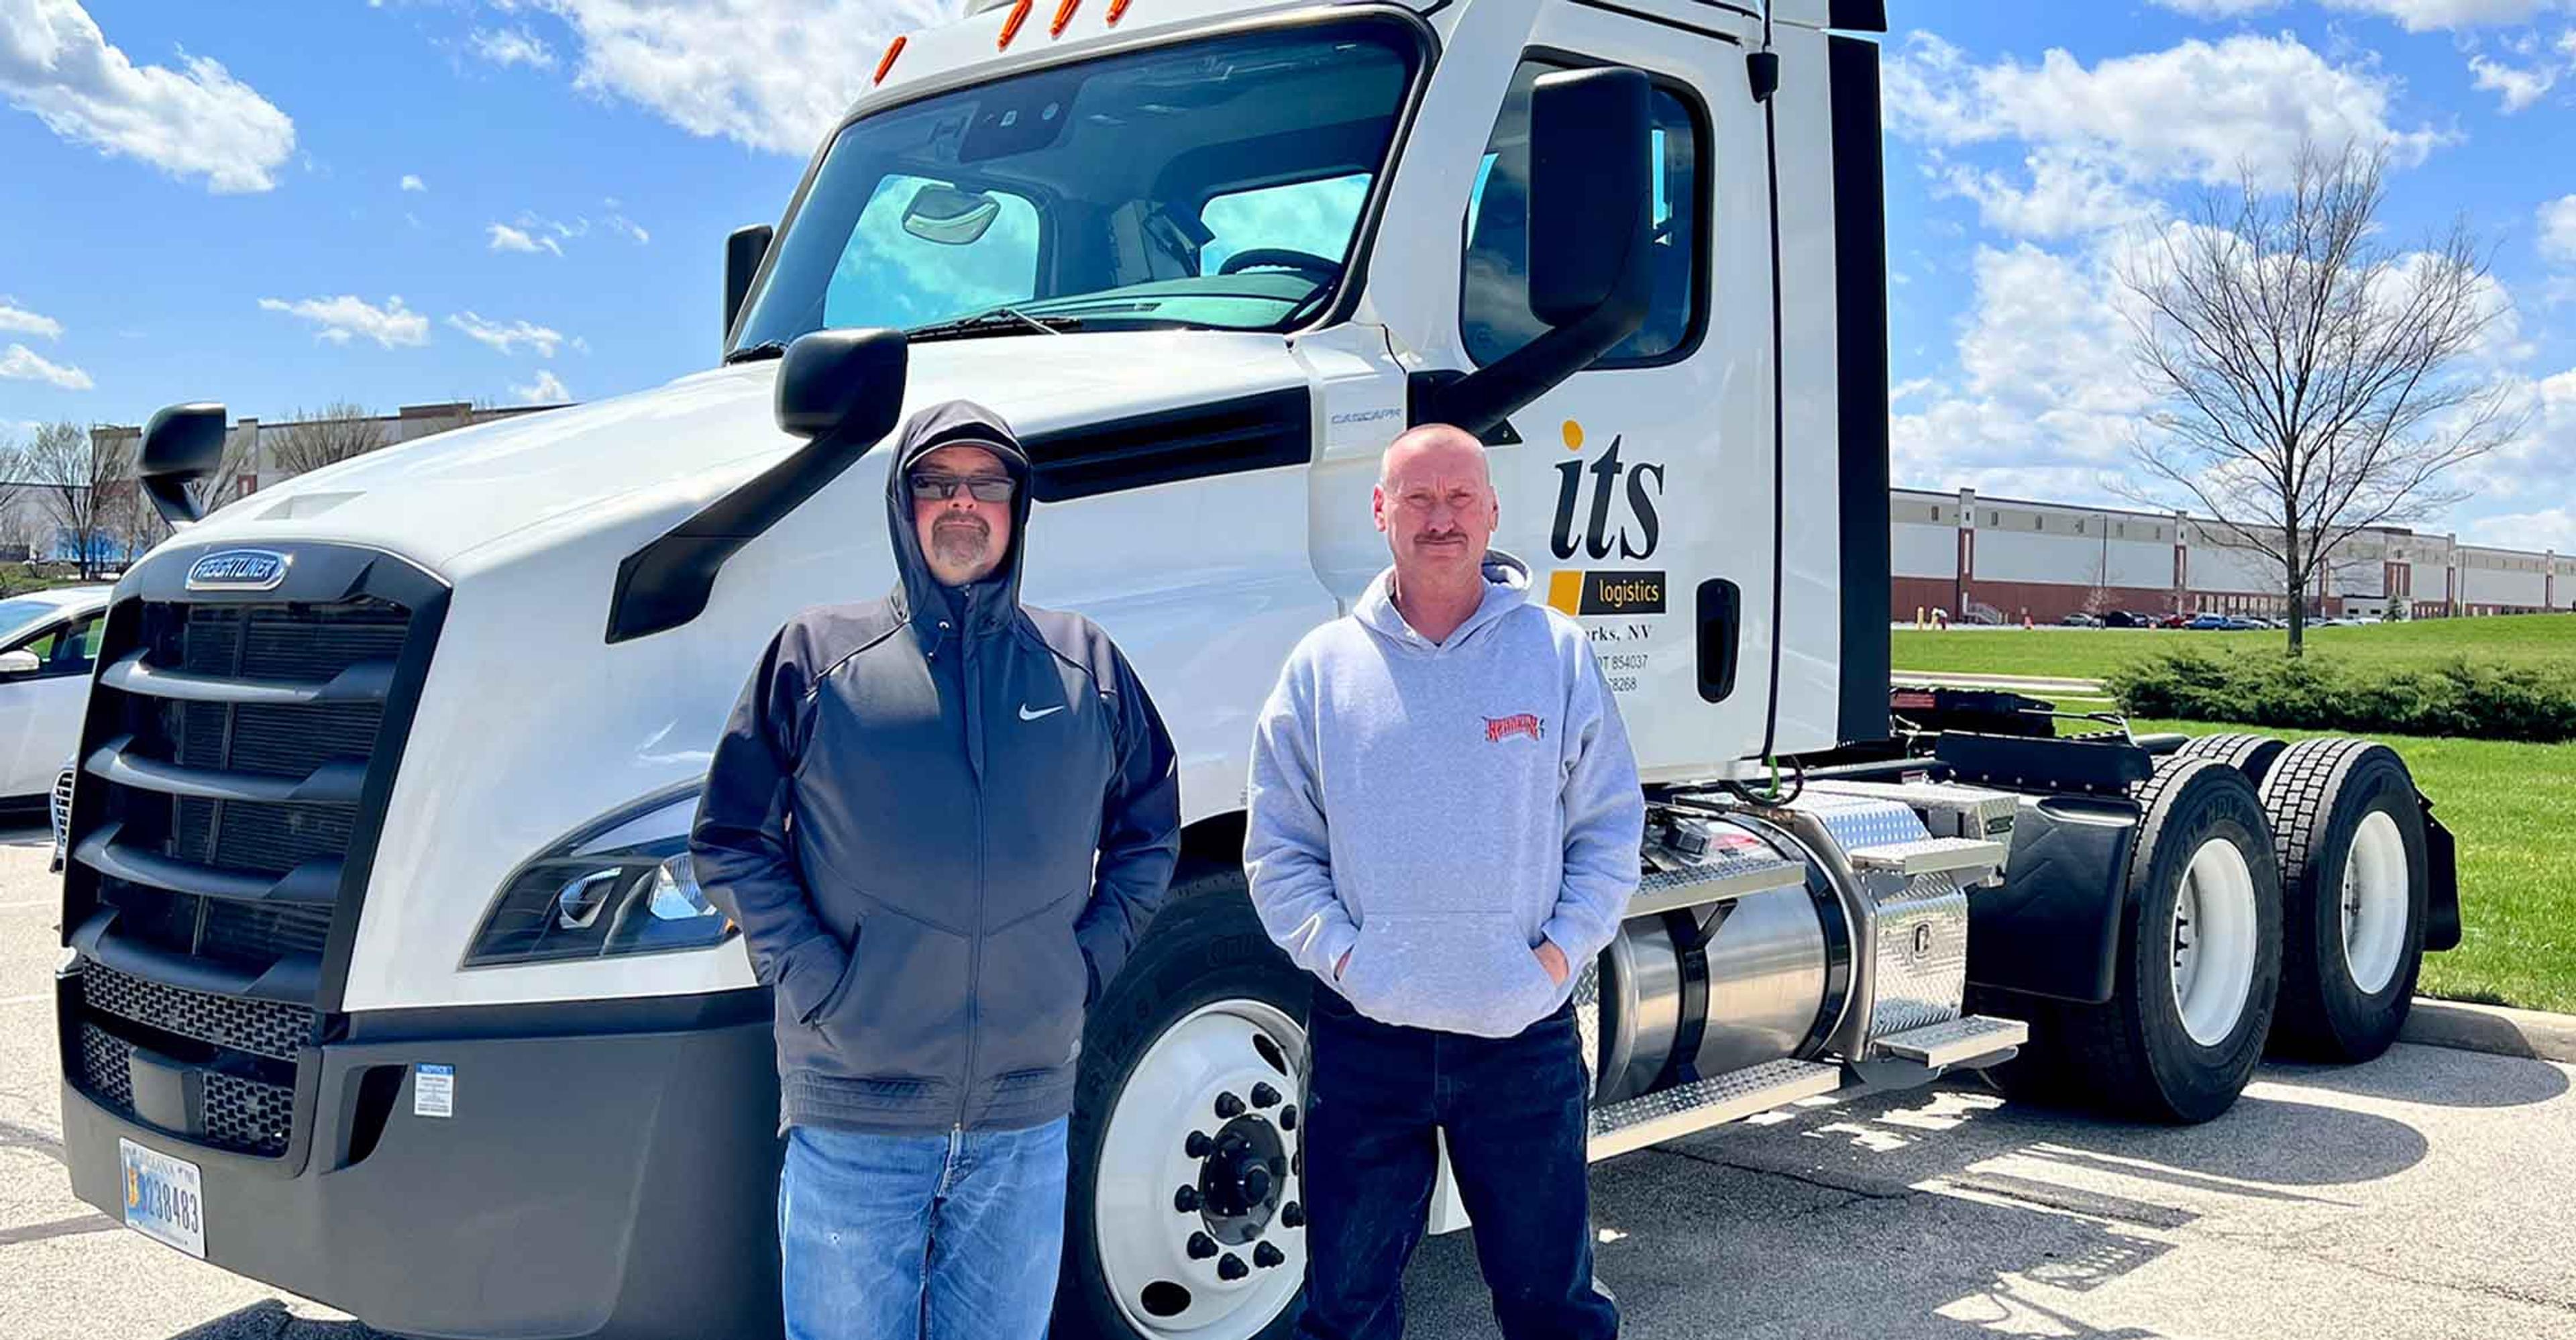 Two ITS drivers standing in front of a truck